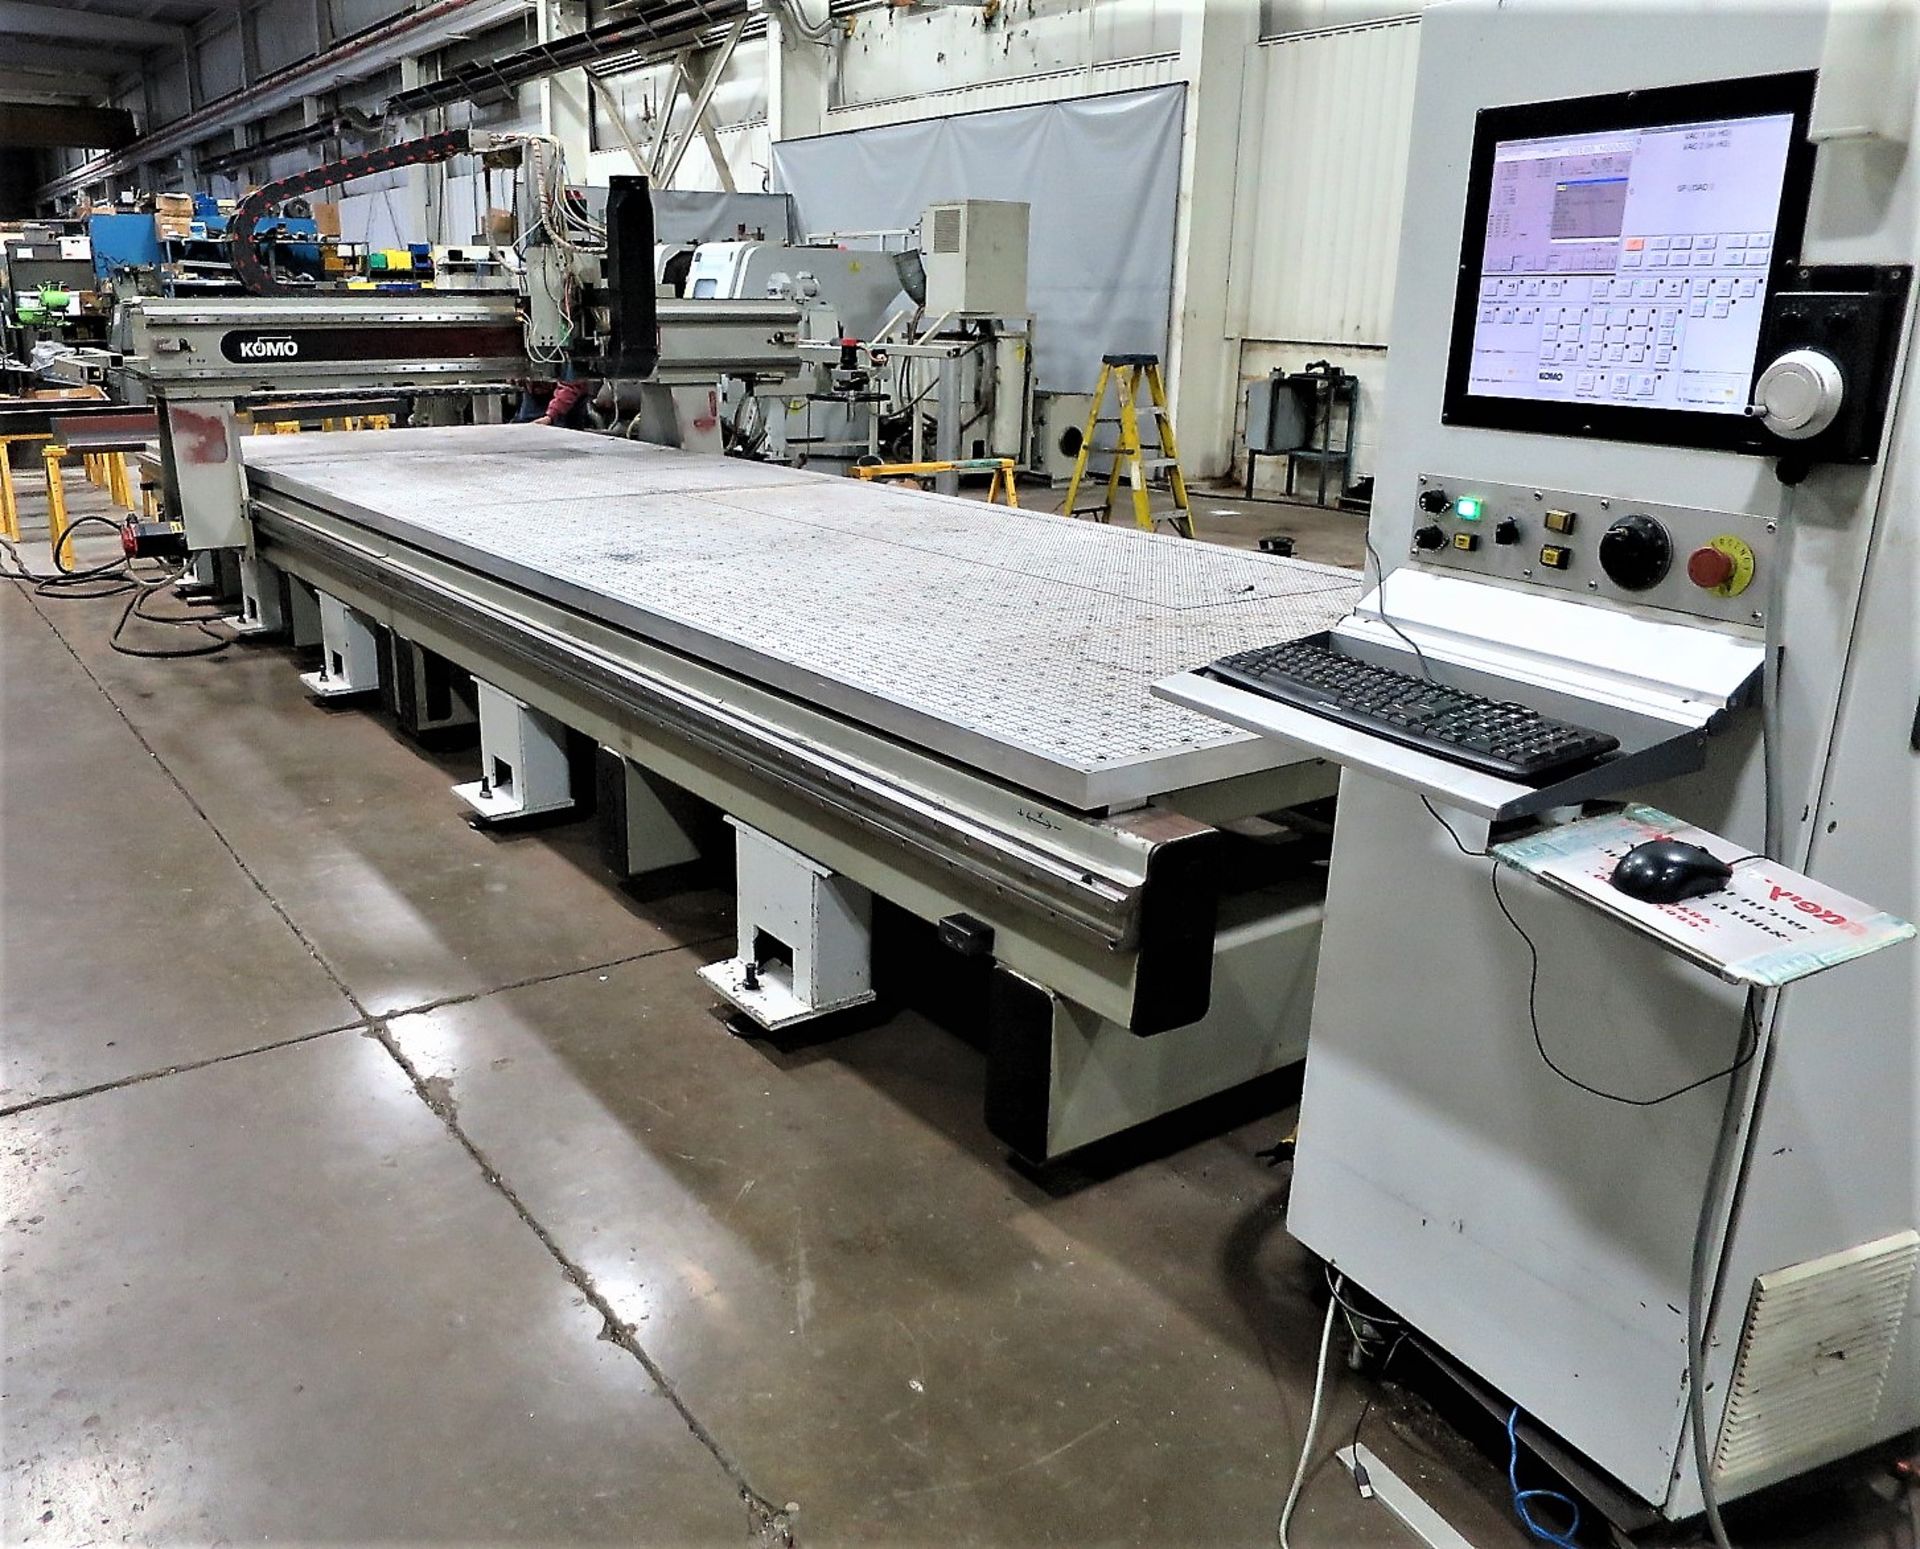 72"x280" Komo Mach One GT 636 CNC large Format Router, S/N 12178, New 2010